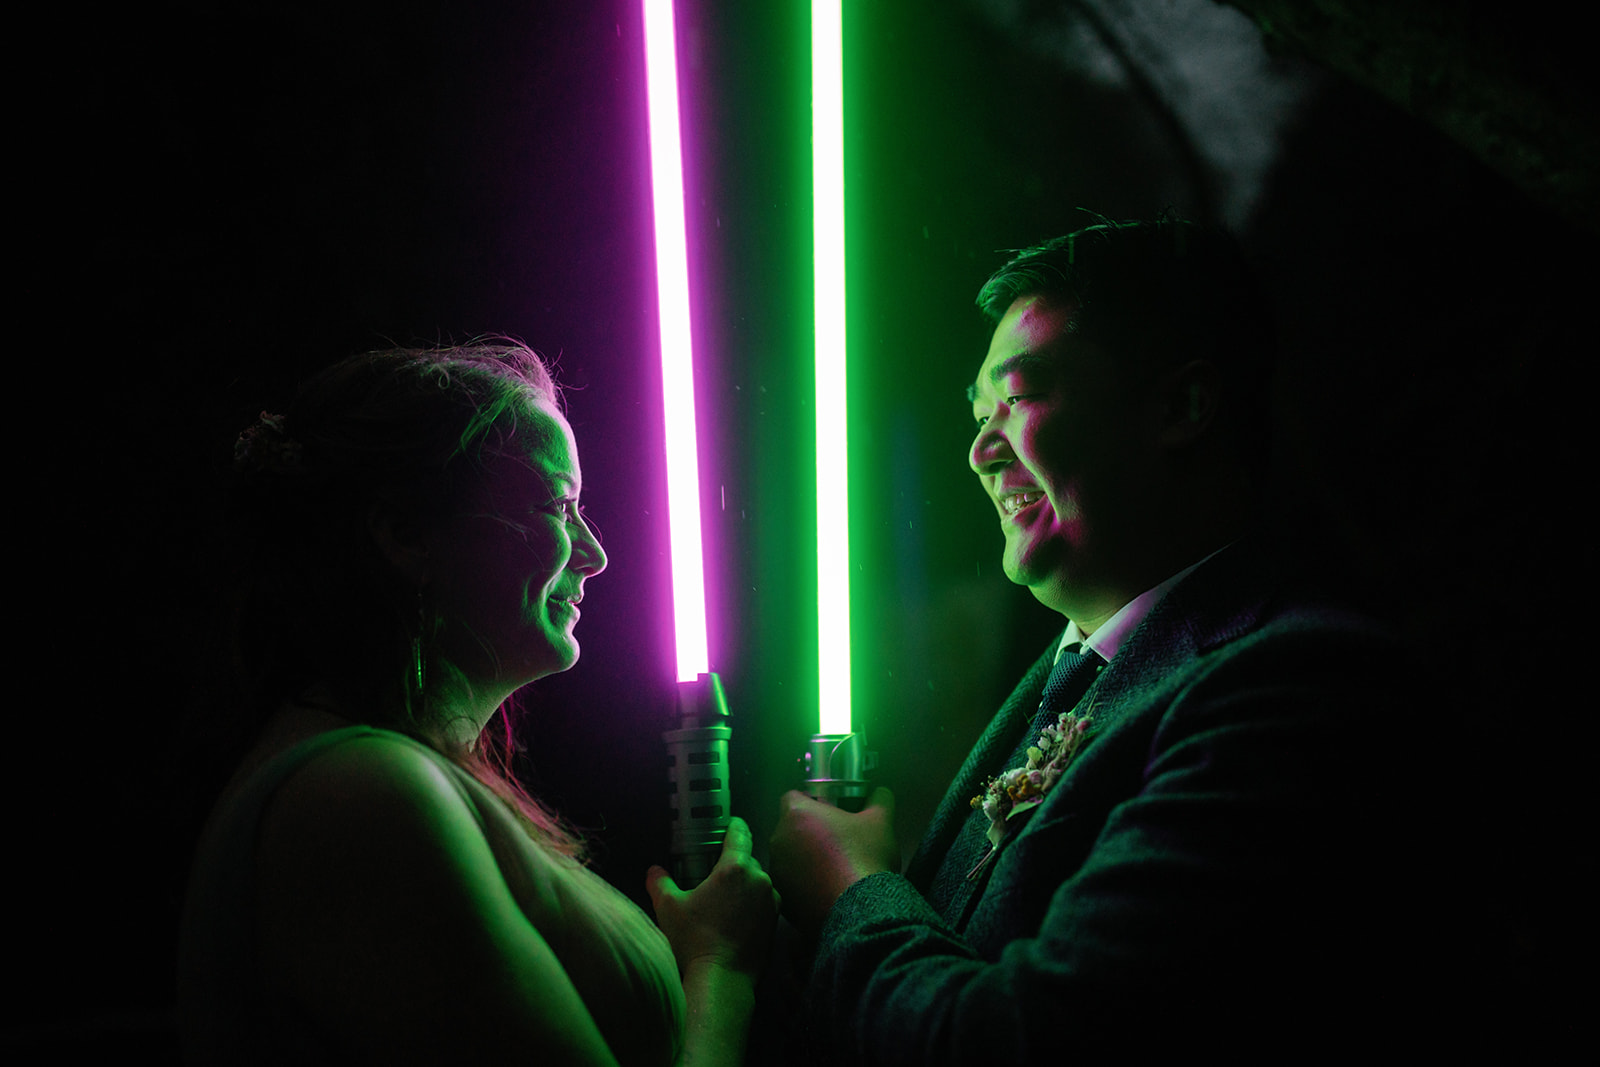 Mellie and Andrew pose for their evening Isle of Skye elopement photos while holding Star Wars light sabers as props.